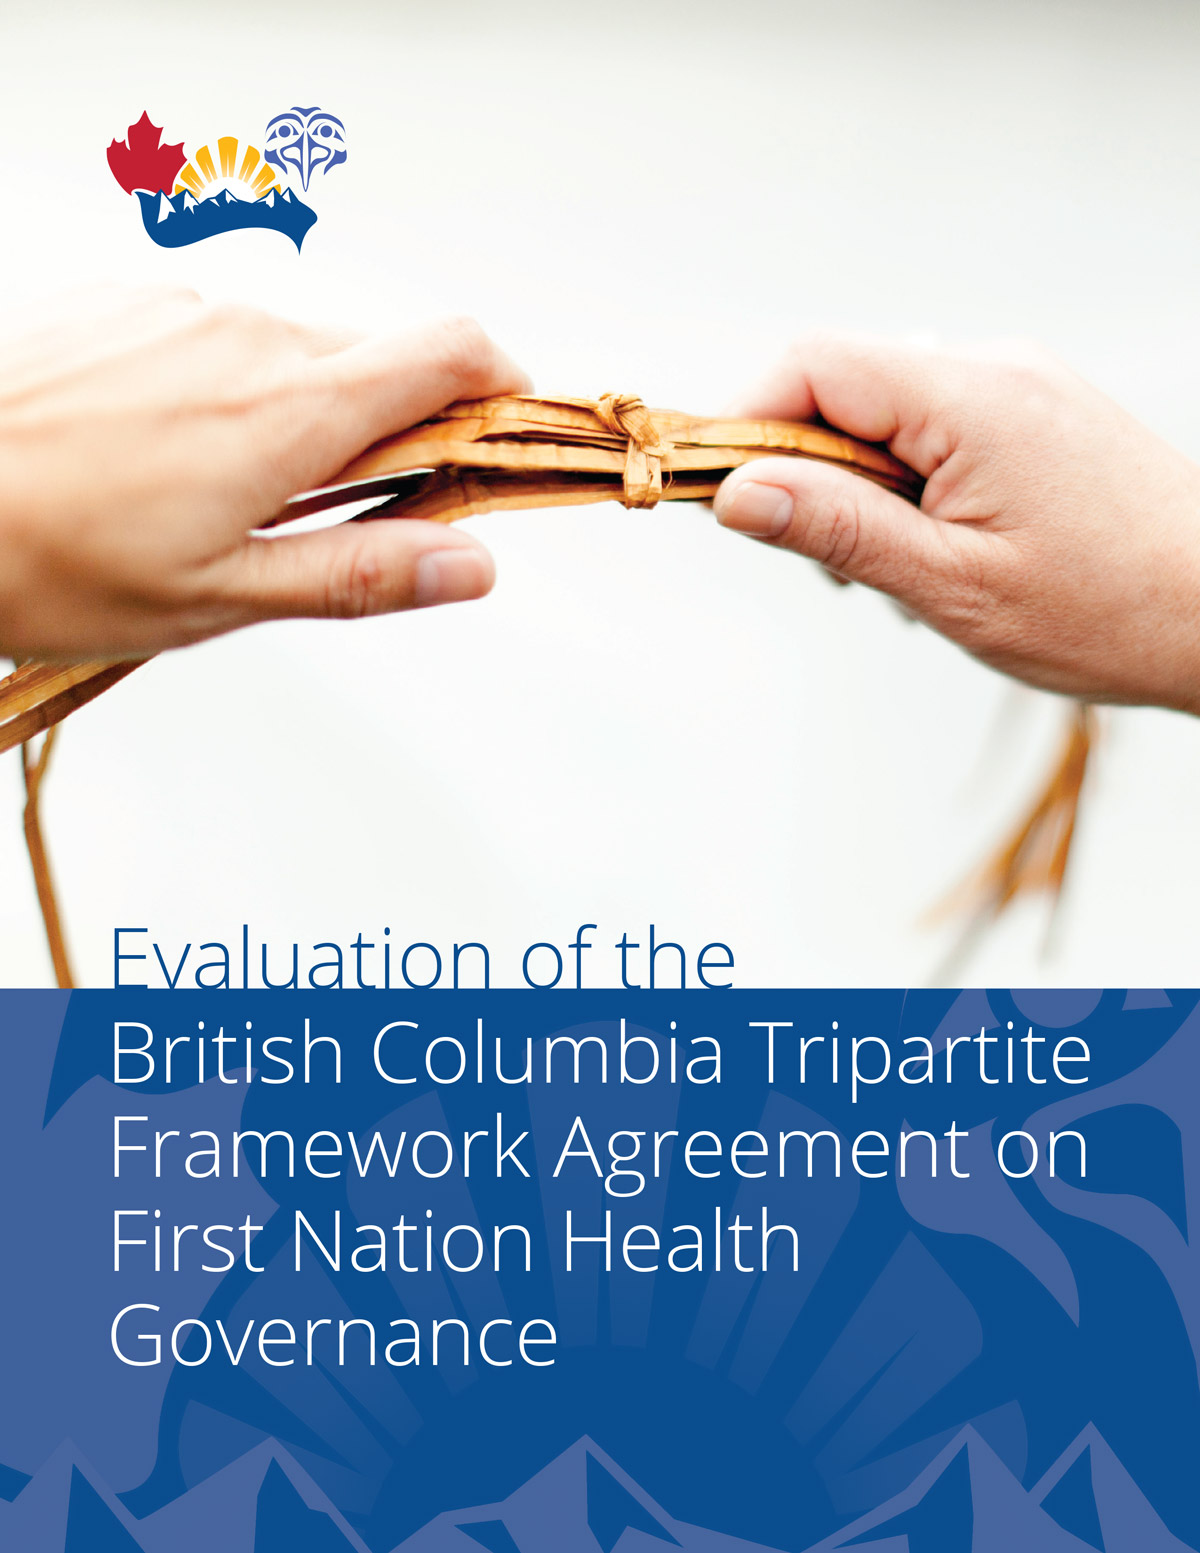 Evaluation-of-the-BC-Tripartite-Framework-Agreement-on-First-Nations-Health-Governance.jpg